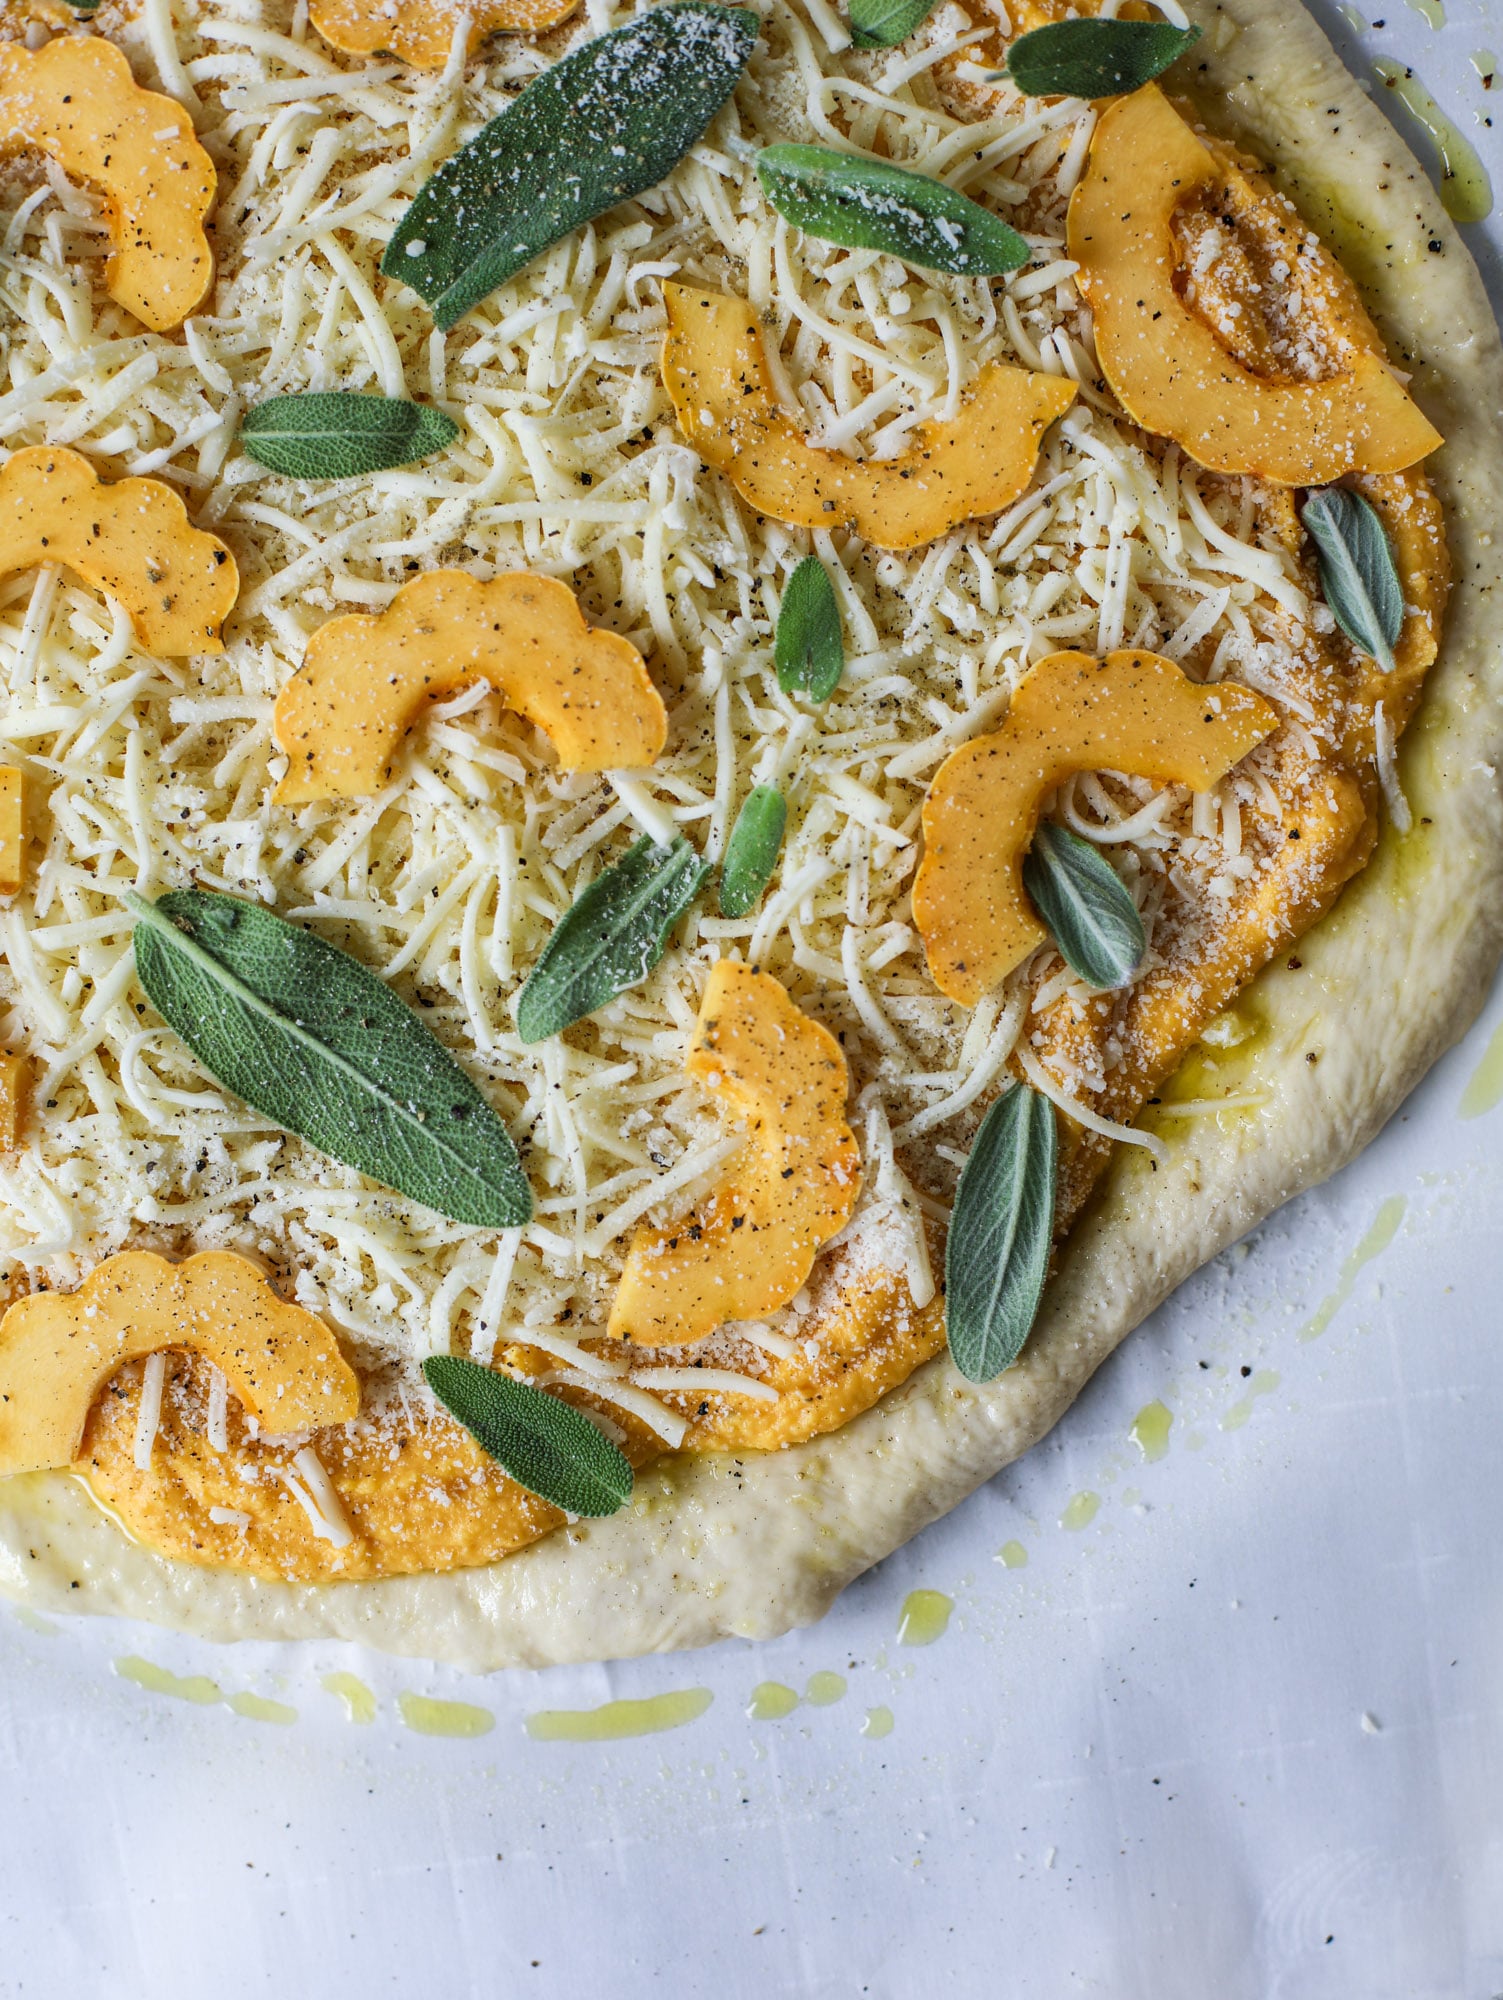 This butternut squash pizza has all the perfect tastes of fall in a pizza! Creamy butternut squash base, sharp parmesan cheese, crispy, fresh sage - it's all these and so super flavorful. It's easy too! I howsweeteats.com #butternutsquash #pizza